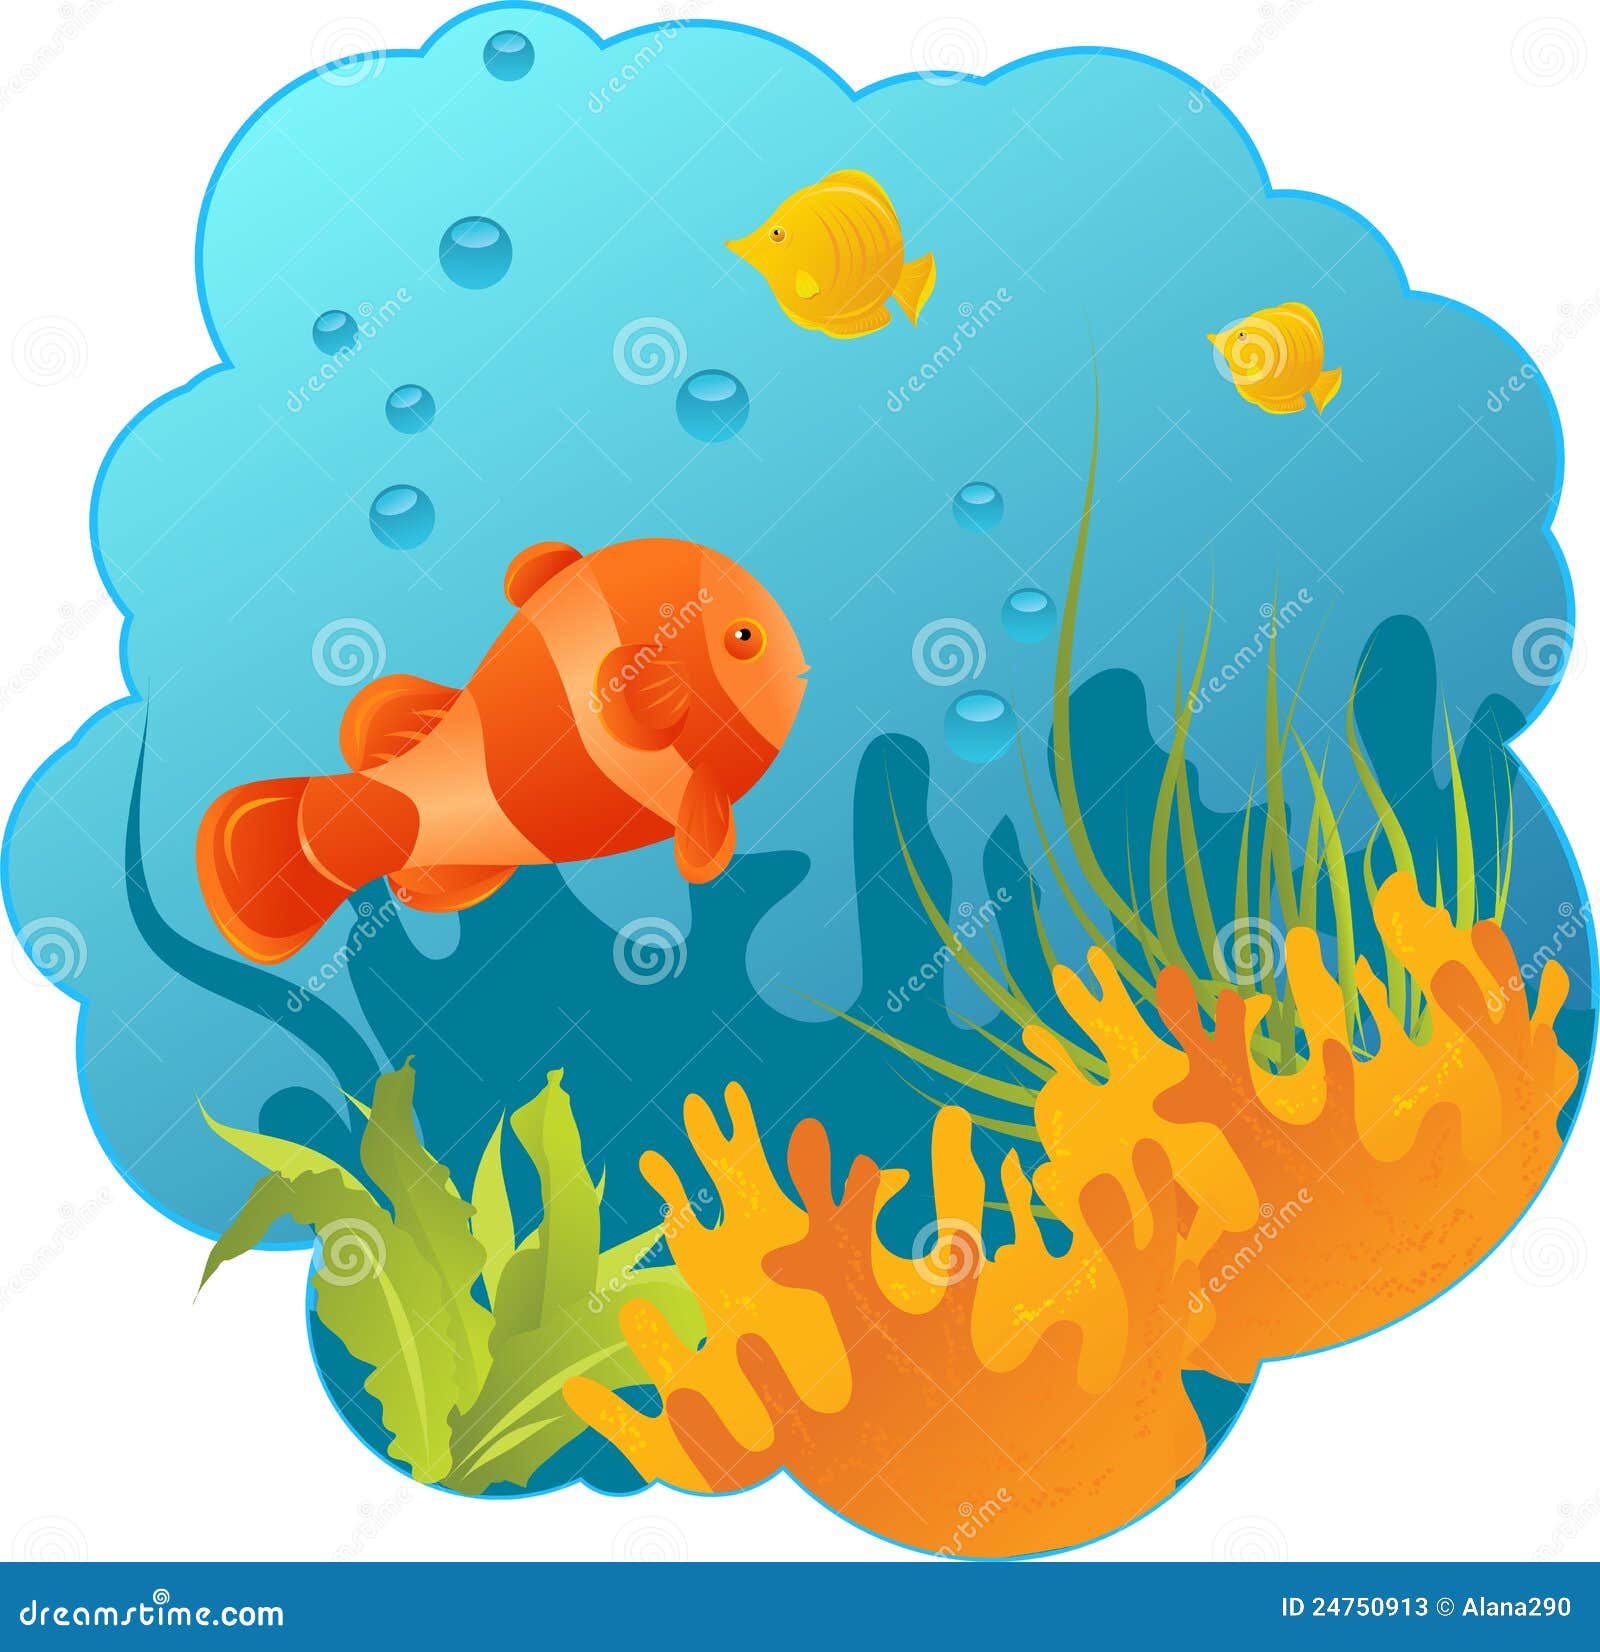 underwater clipart images - photo #27